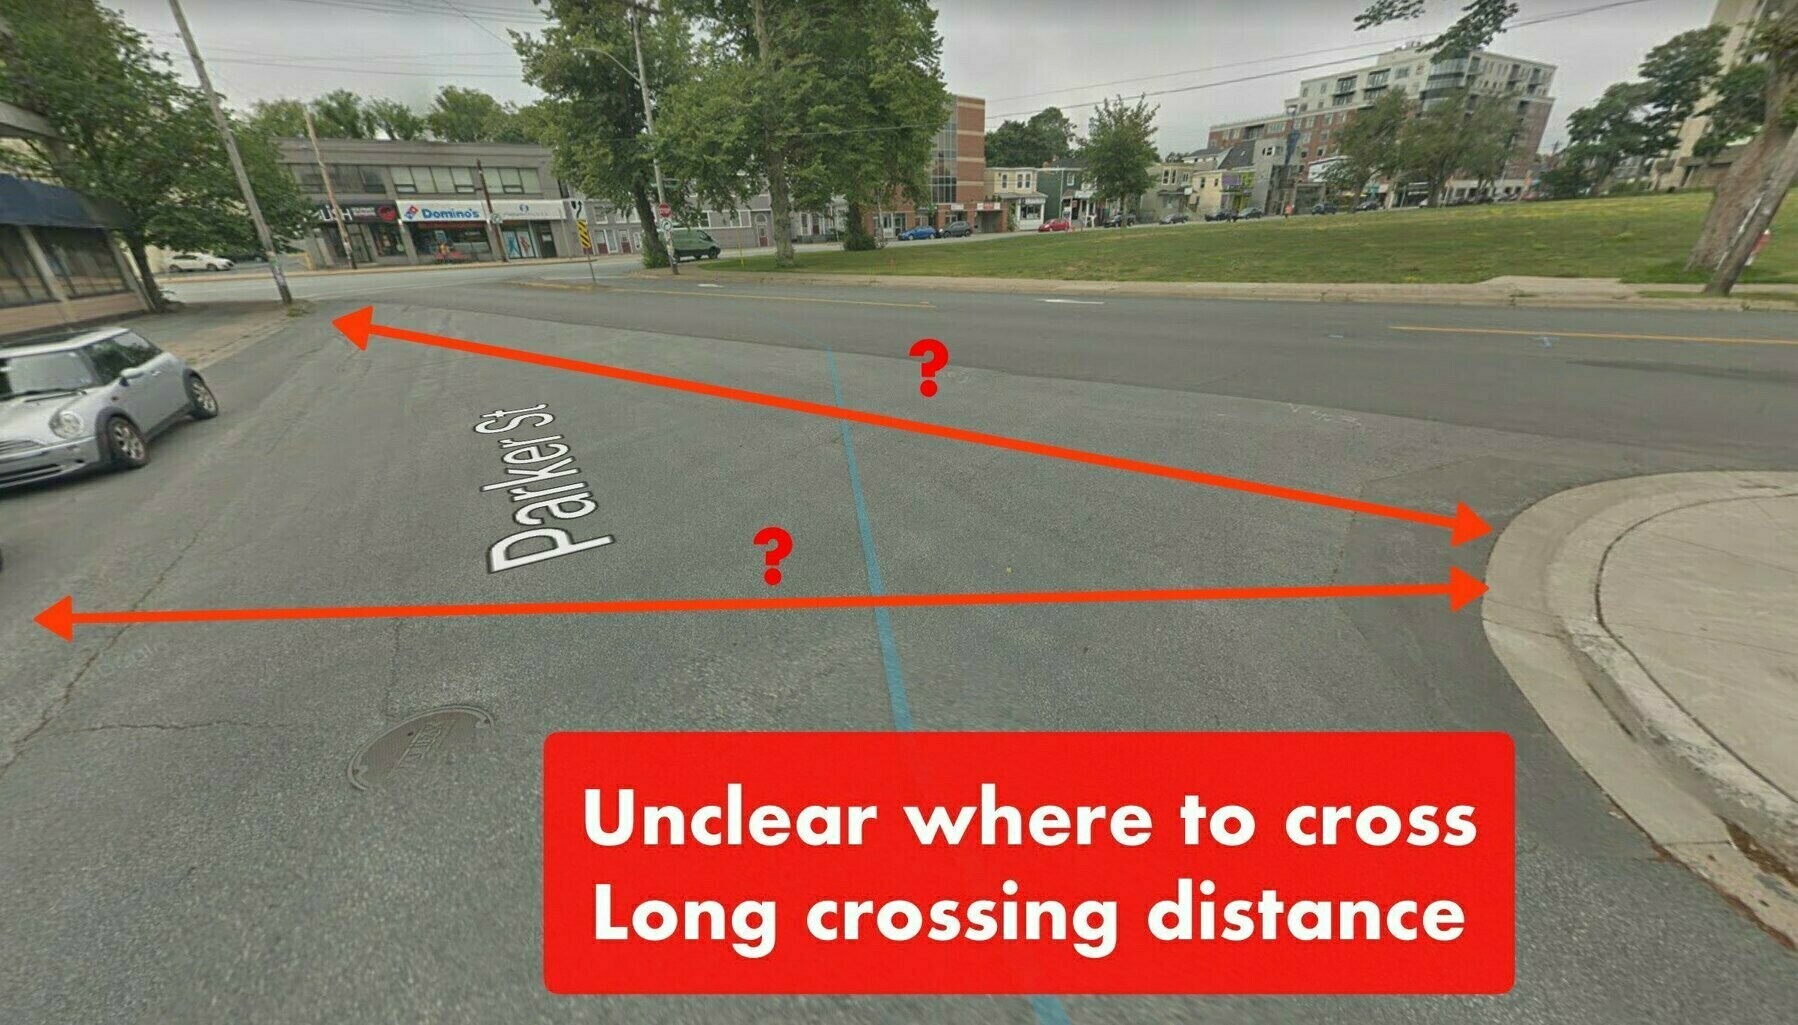 A Google Maps view of the intersection showing multiple options of how to cross with arrows pointing out the long crossing distance